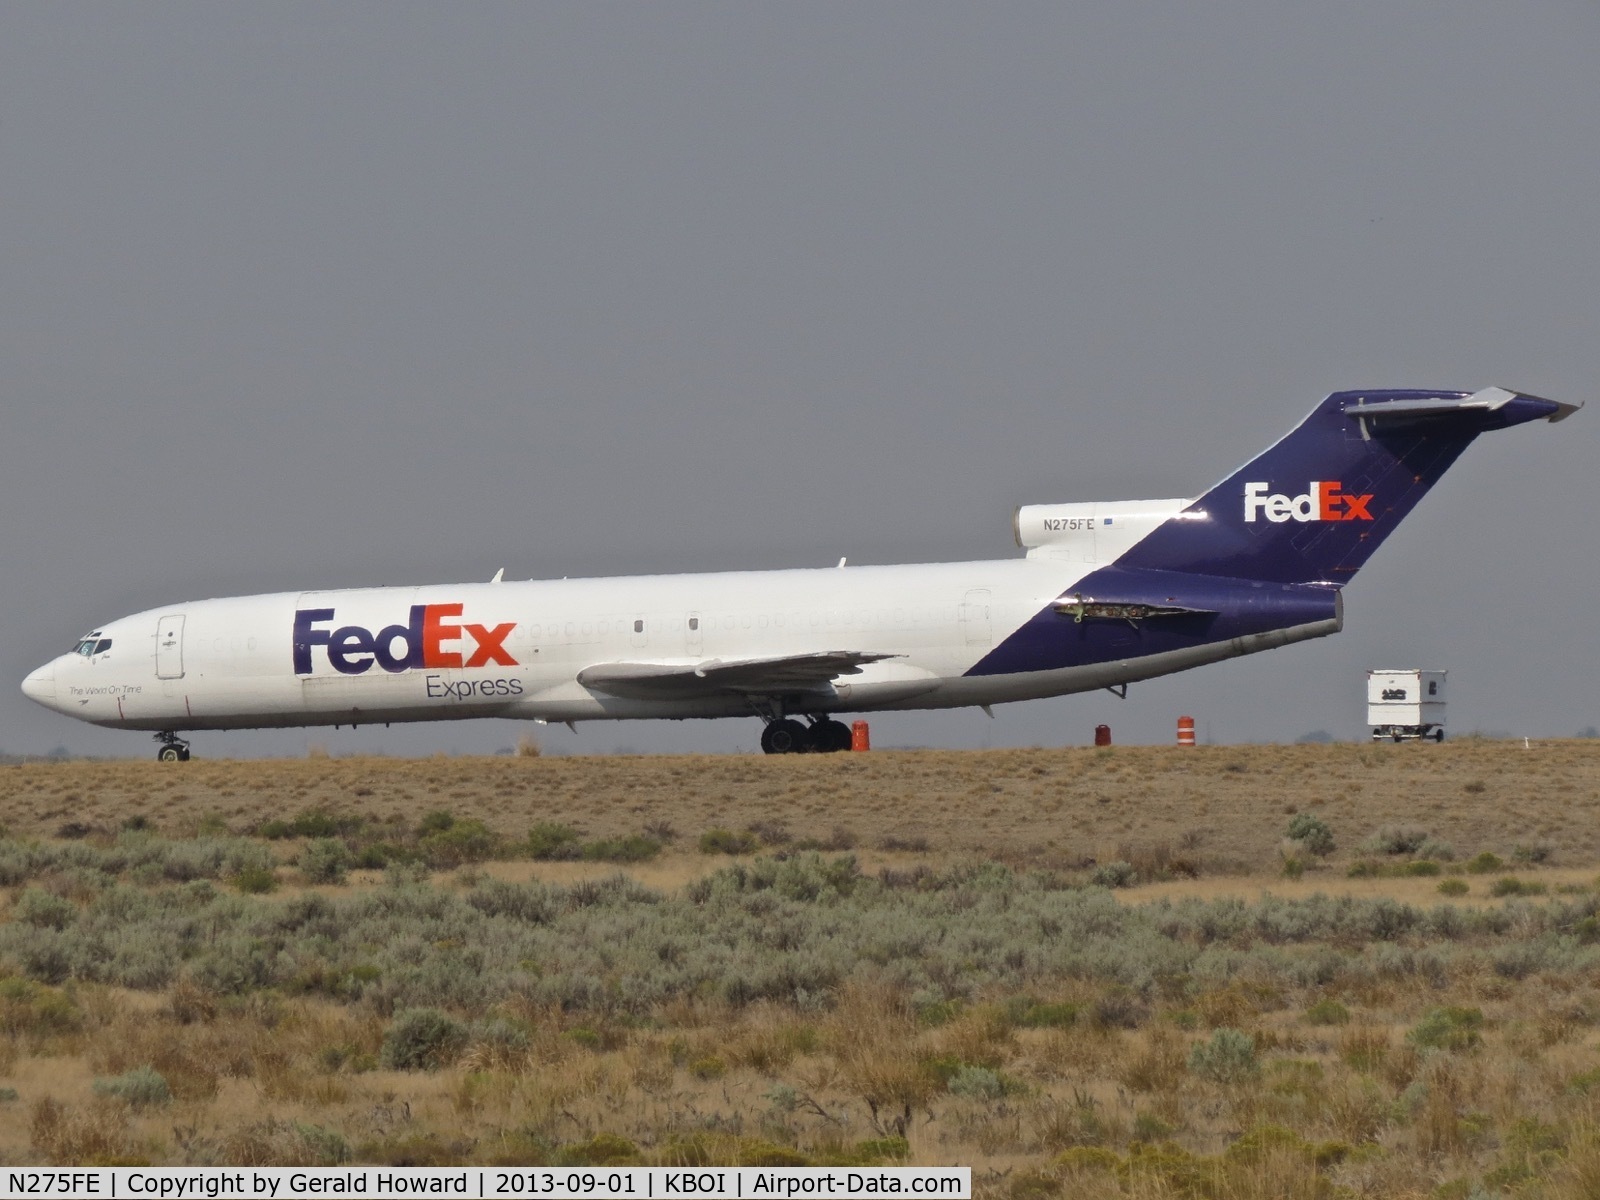 N275FE, 1980 Boeing 727-233F C/N 22040, ARFF training aircraft donated by Fed Ex. parked at the east end of the Idaho ANG assault strip located southeast of the airport.